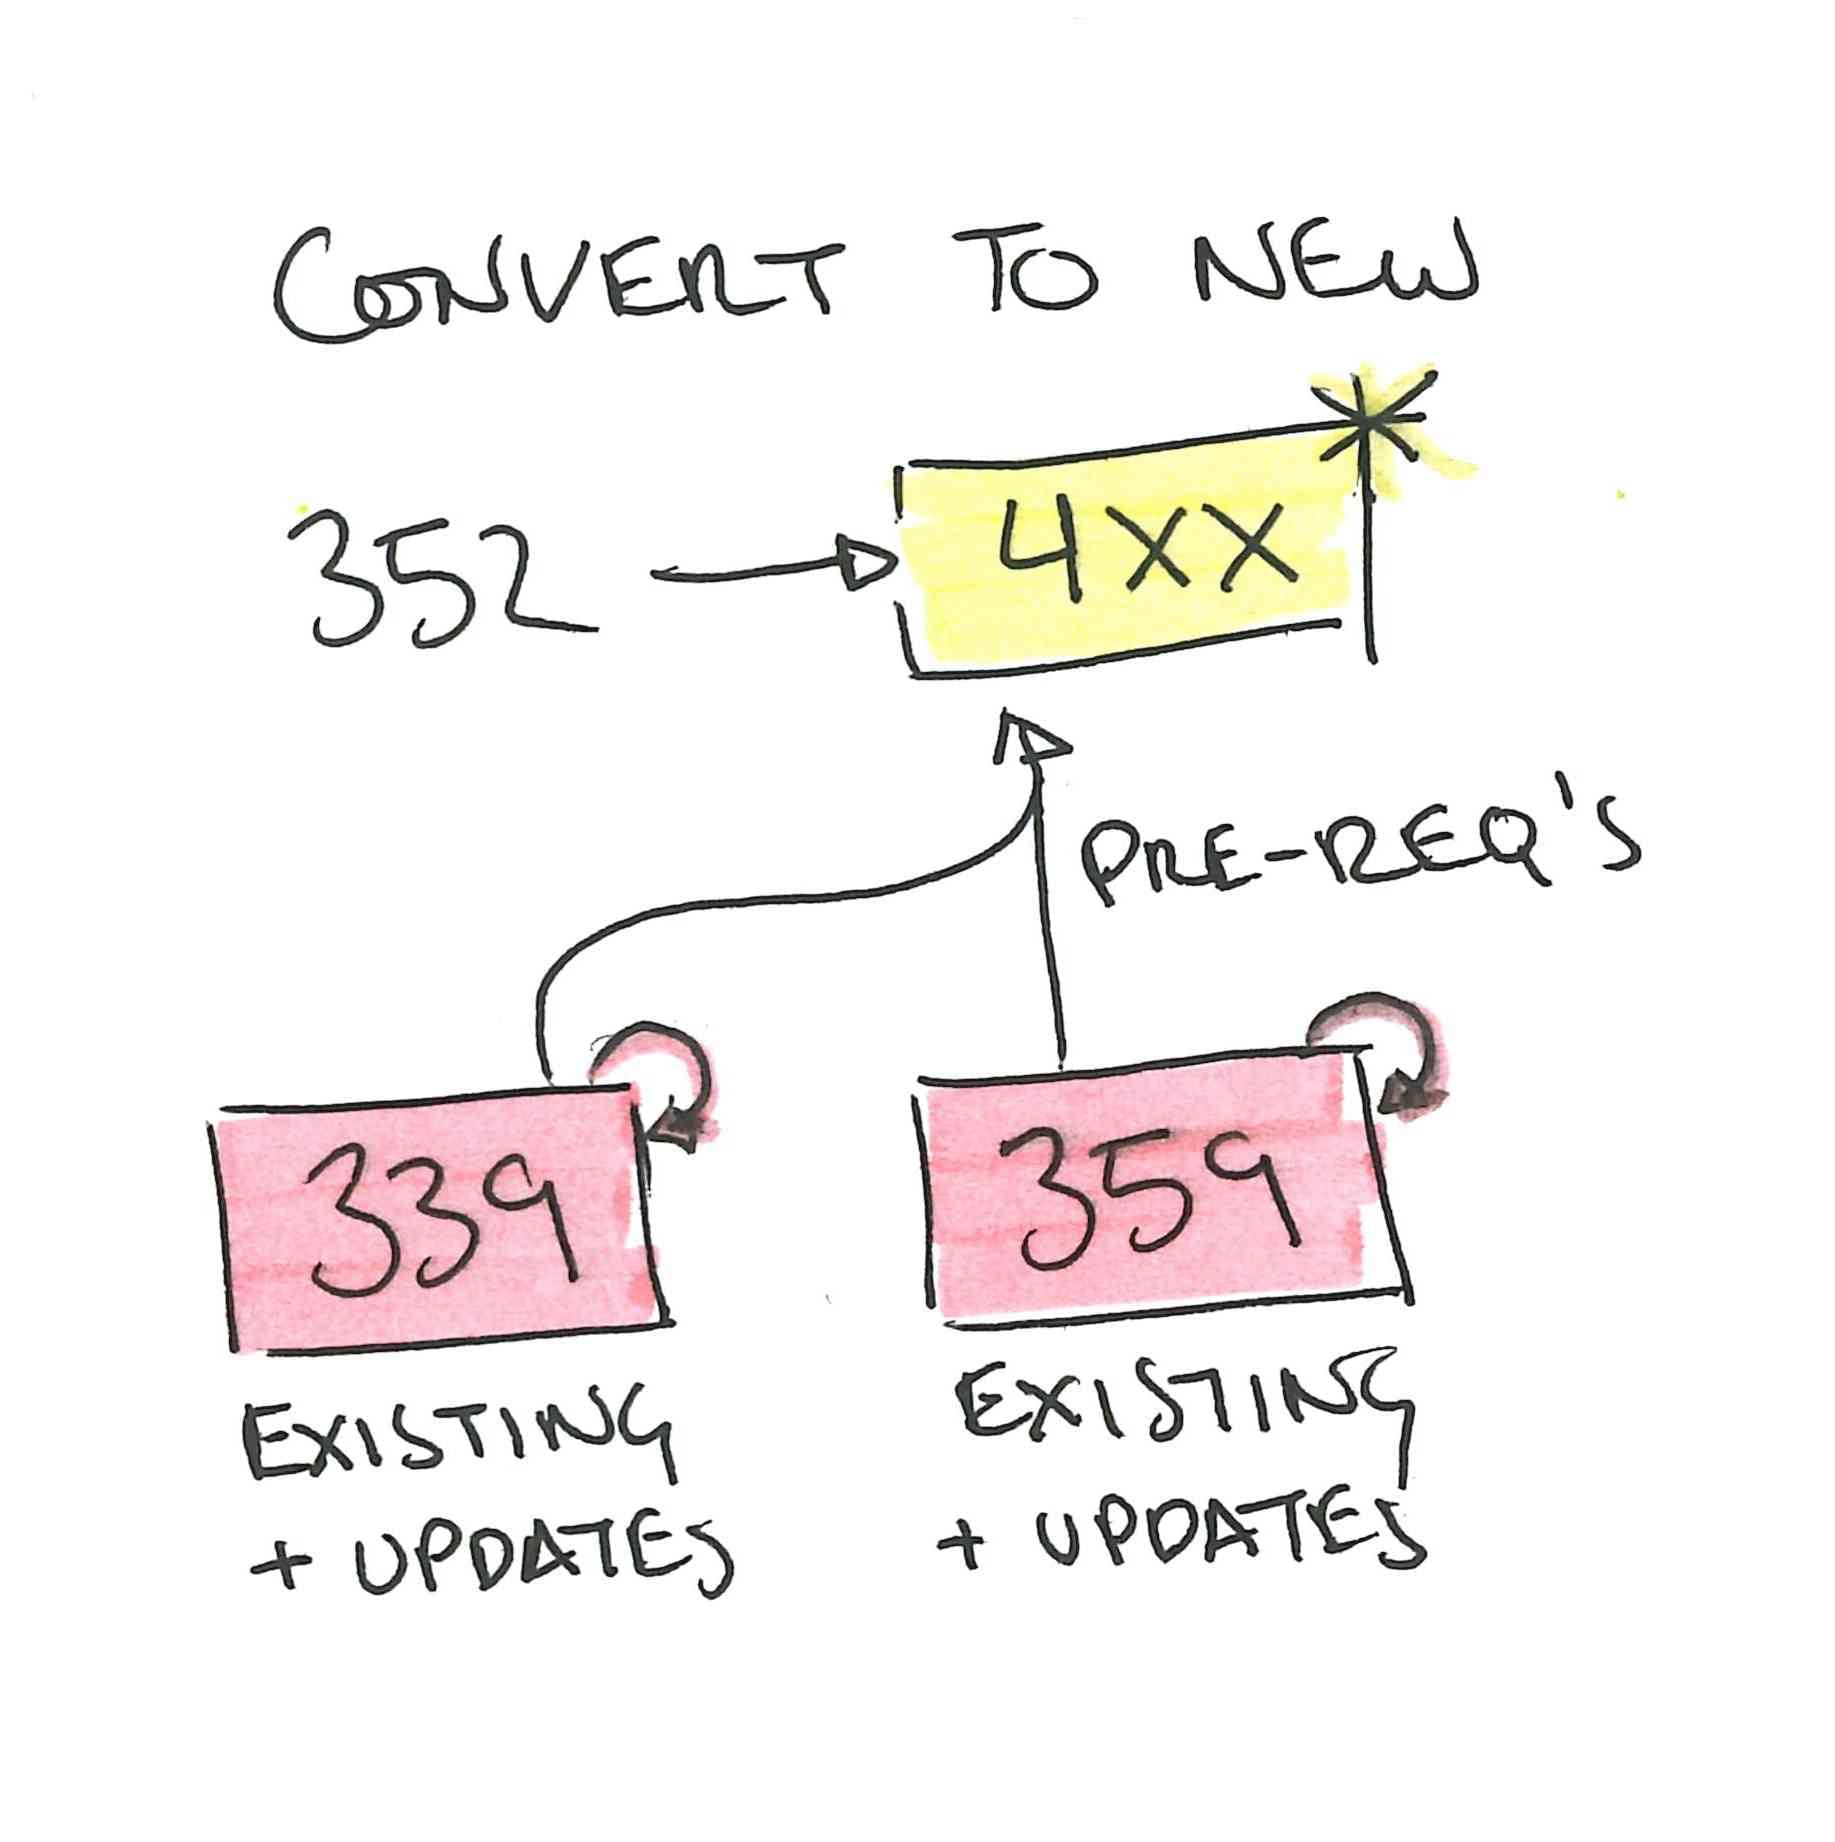 An illustration showing how three courses are revised to form a speculative concentration